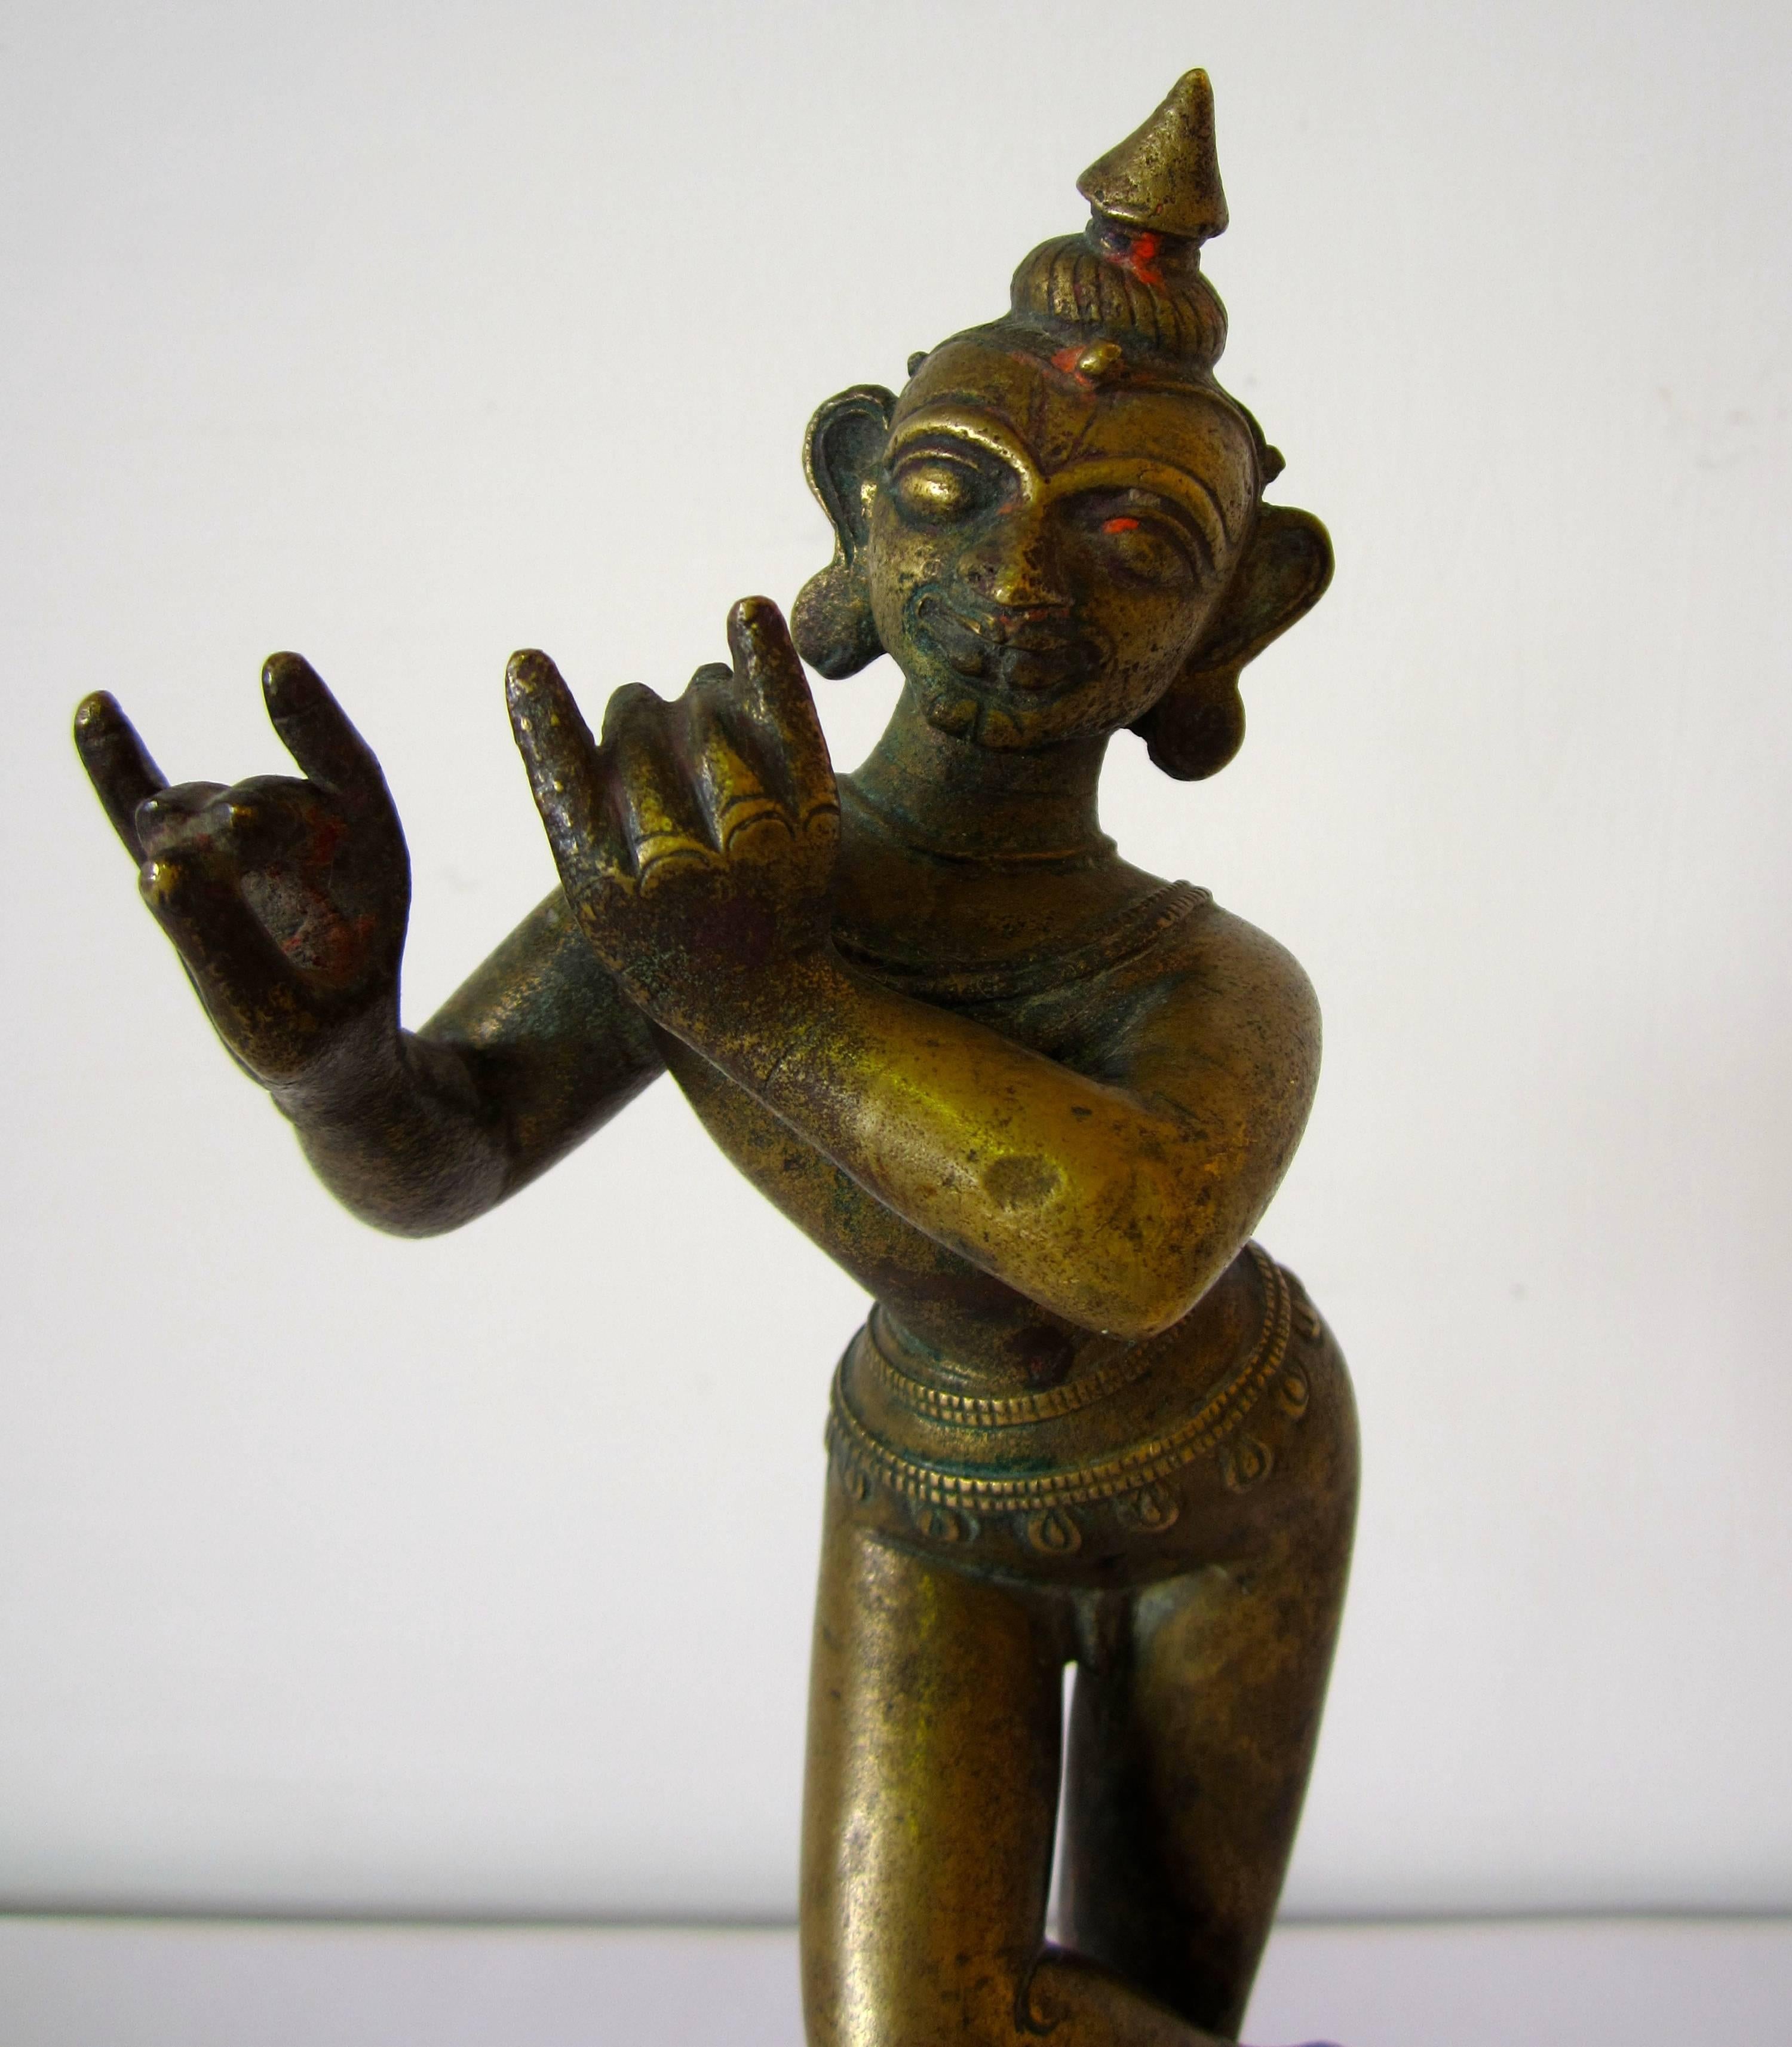 A bronze figure of Krishna Venugopala, standing on a lotus base with ankles crossed and hands as if holding a flute, with jewelry and belt. Orissa or Bengala, 18th century.